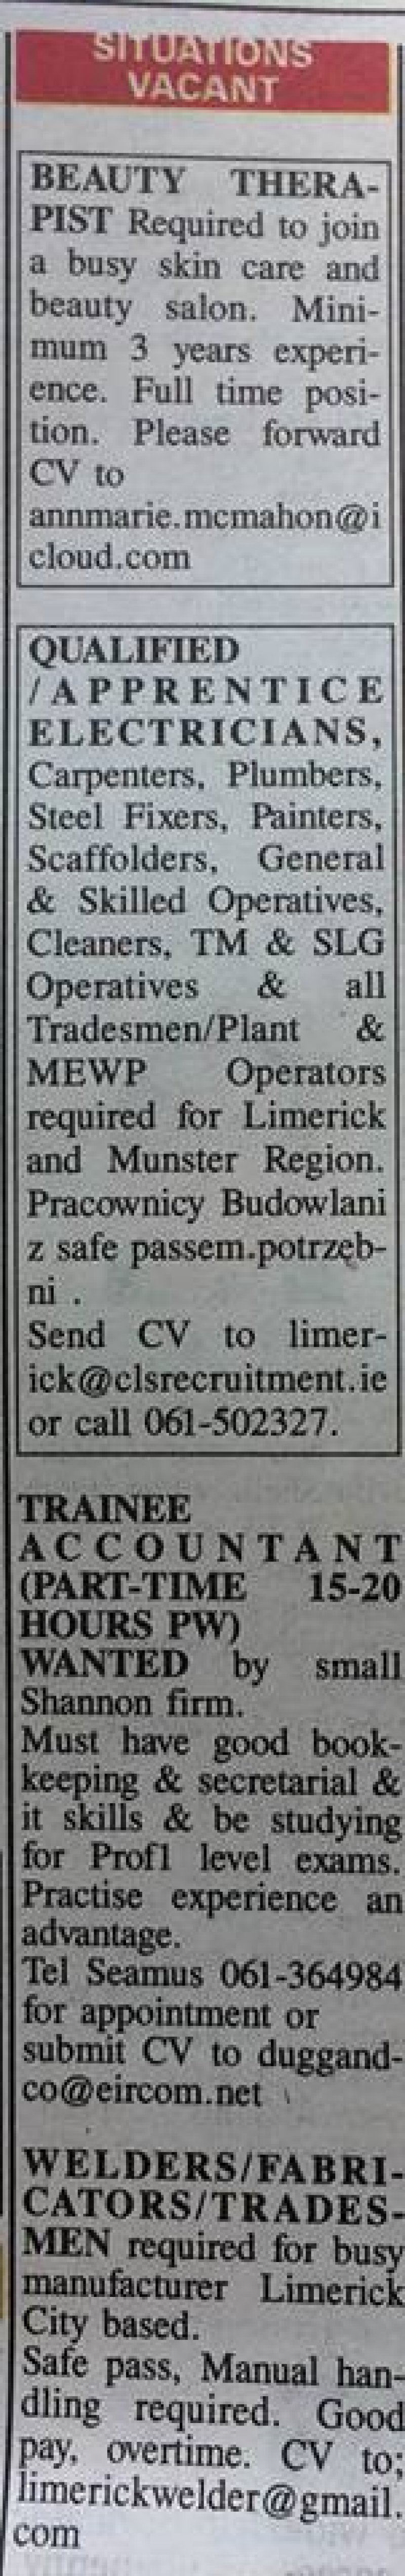 Limerick Leader - Situations Vacant